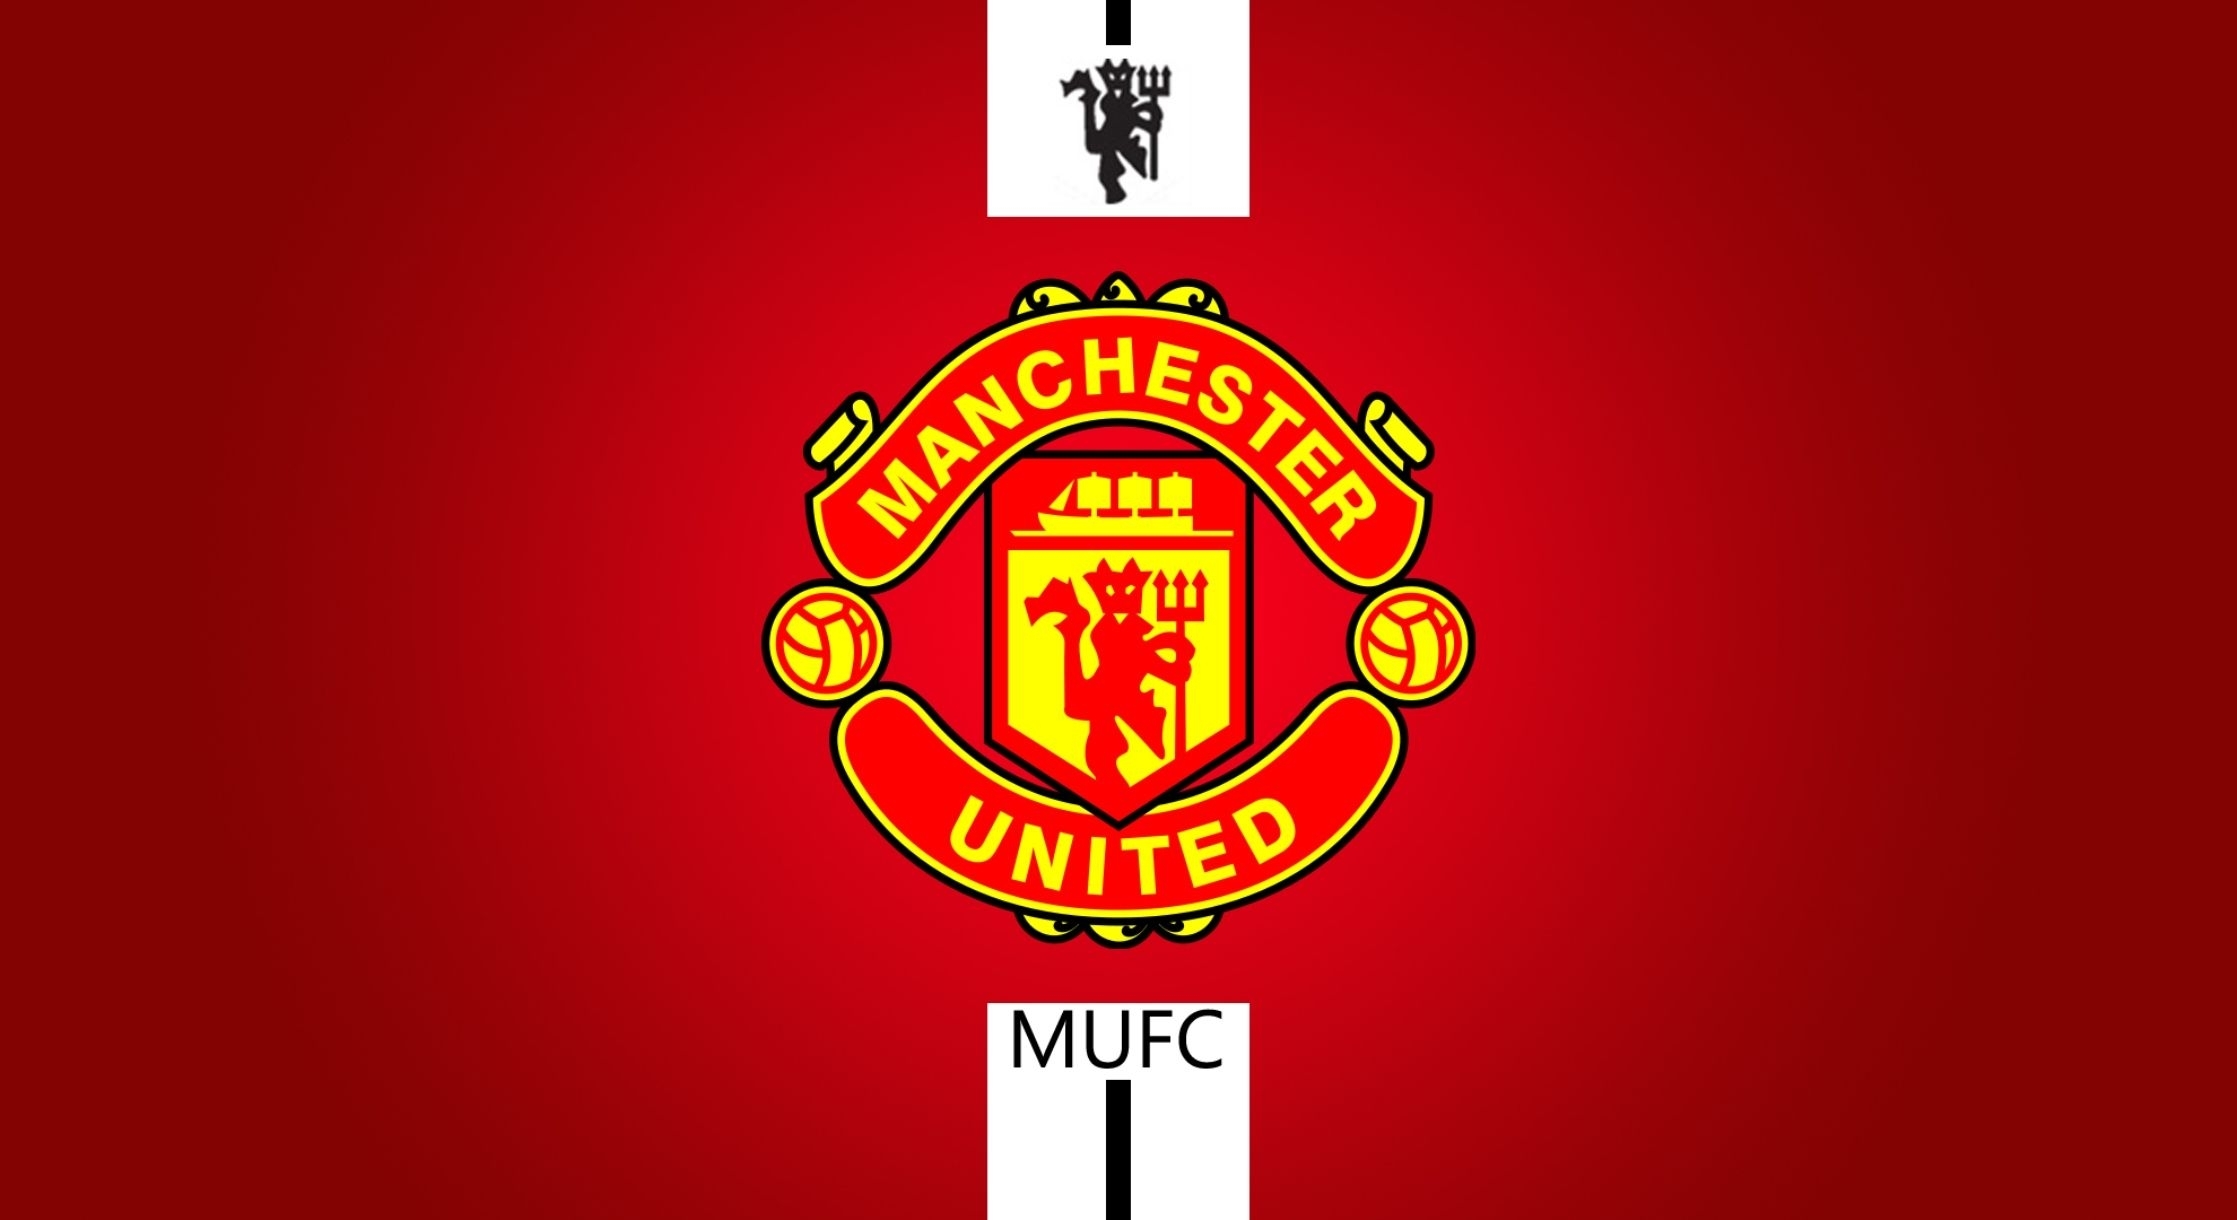 free manchester united hd wallpaper 2017 high resolution this